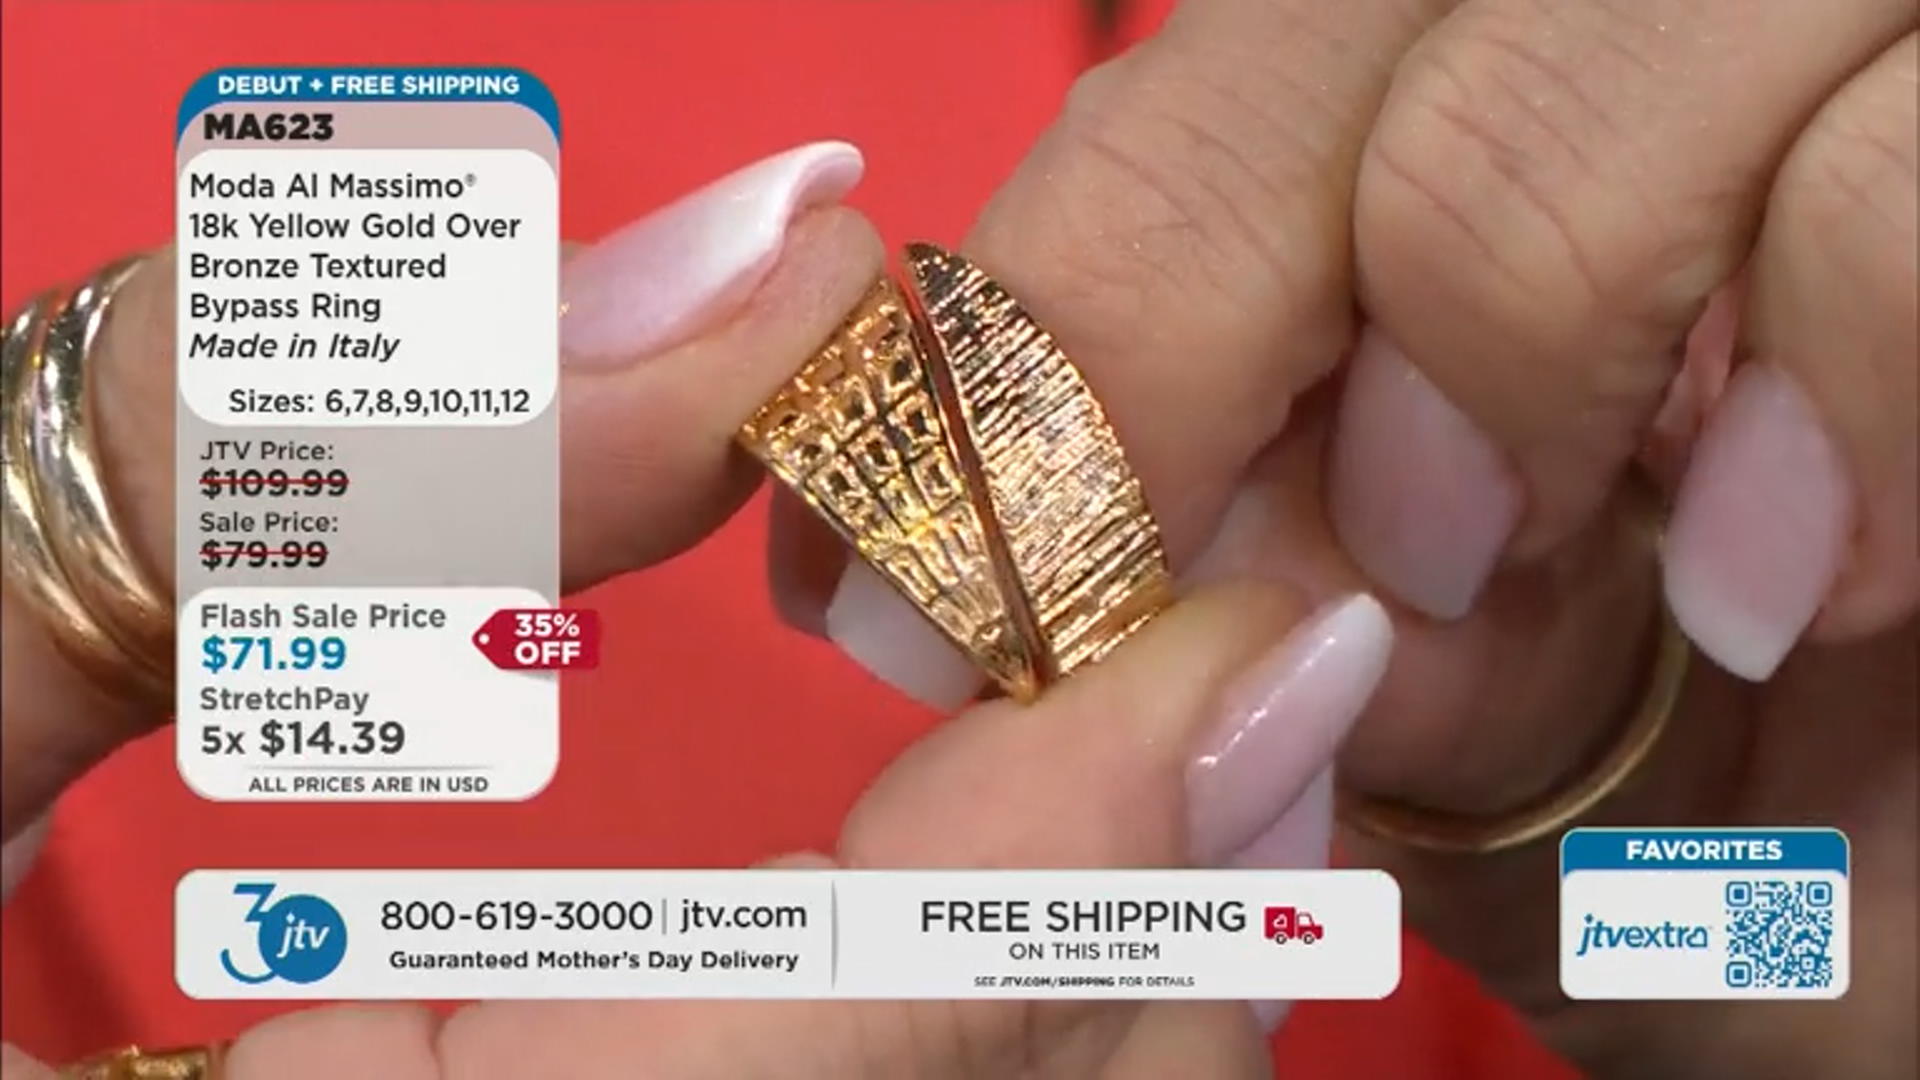 18k Yellow Gold Over Bronze Textured Bypass Ring Video Thumbnail